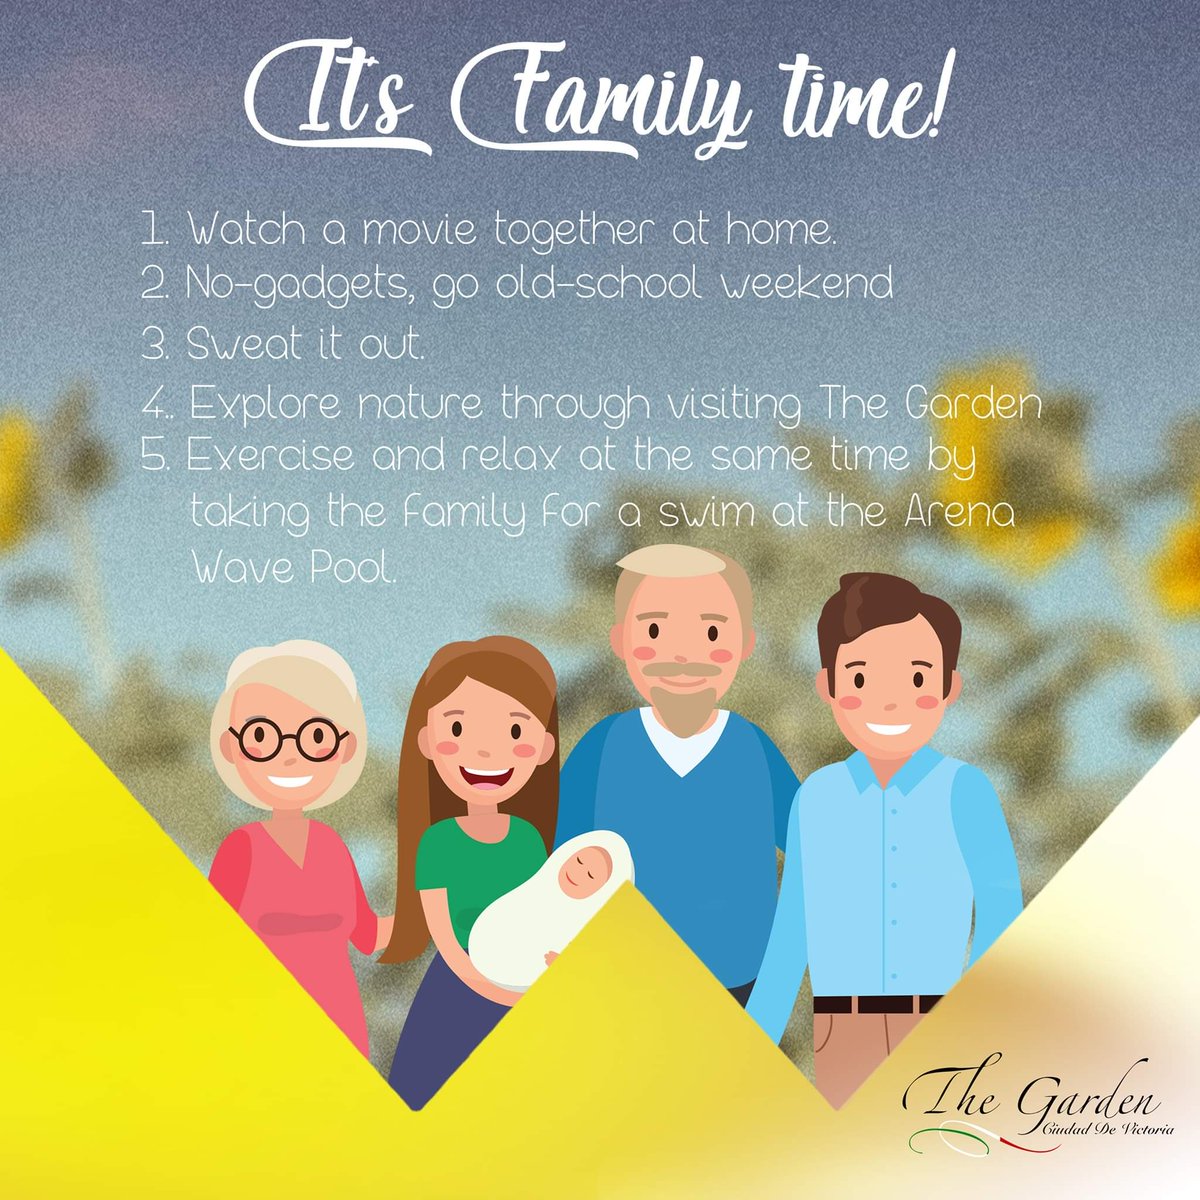 Need some ideas for some family quality time this weekend? We gotchu, fam! 👨‍👩‍👧‍👦